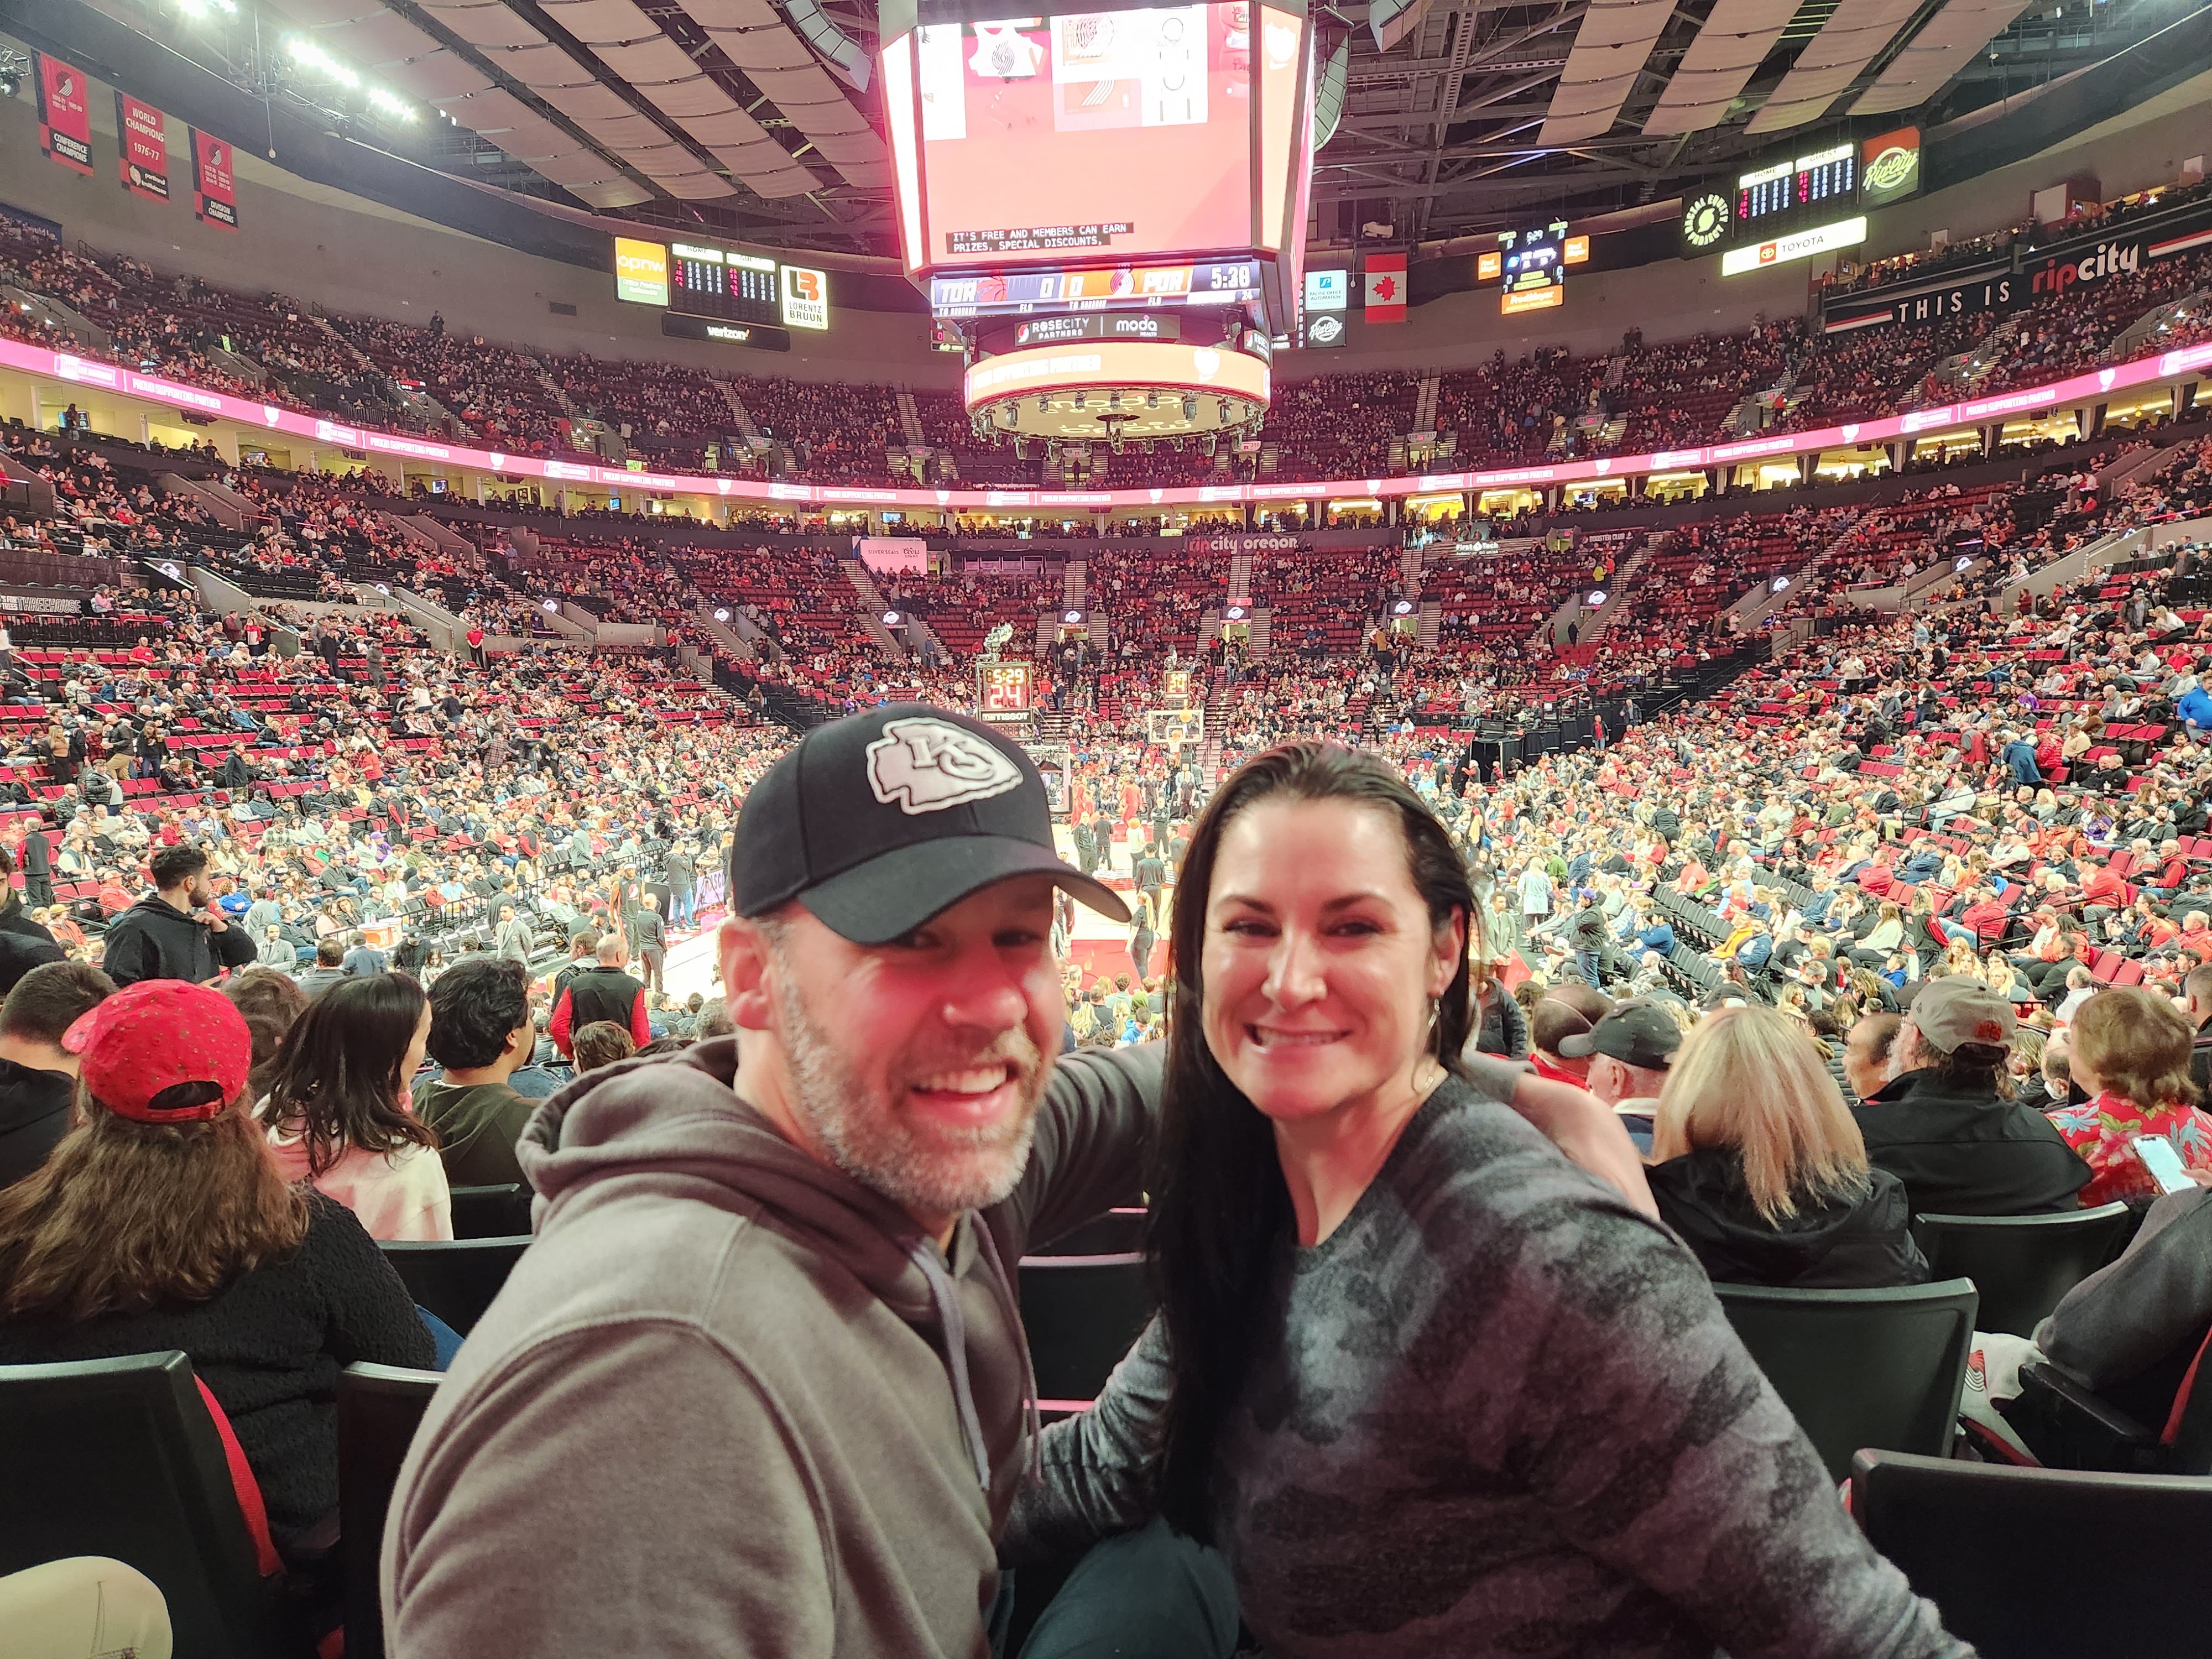 Image of Amber and her boyfriend at a Portland Trailblazers game. The picture shows both with their heads turned as the basketball court is in the background. 